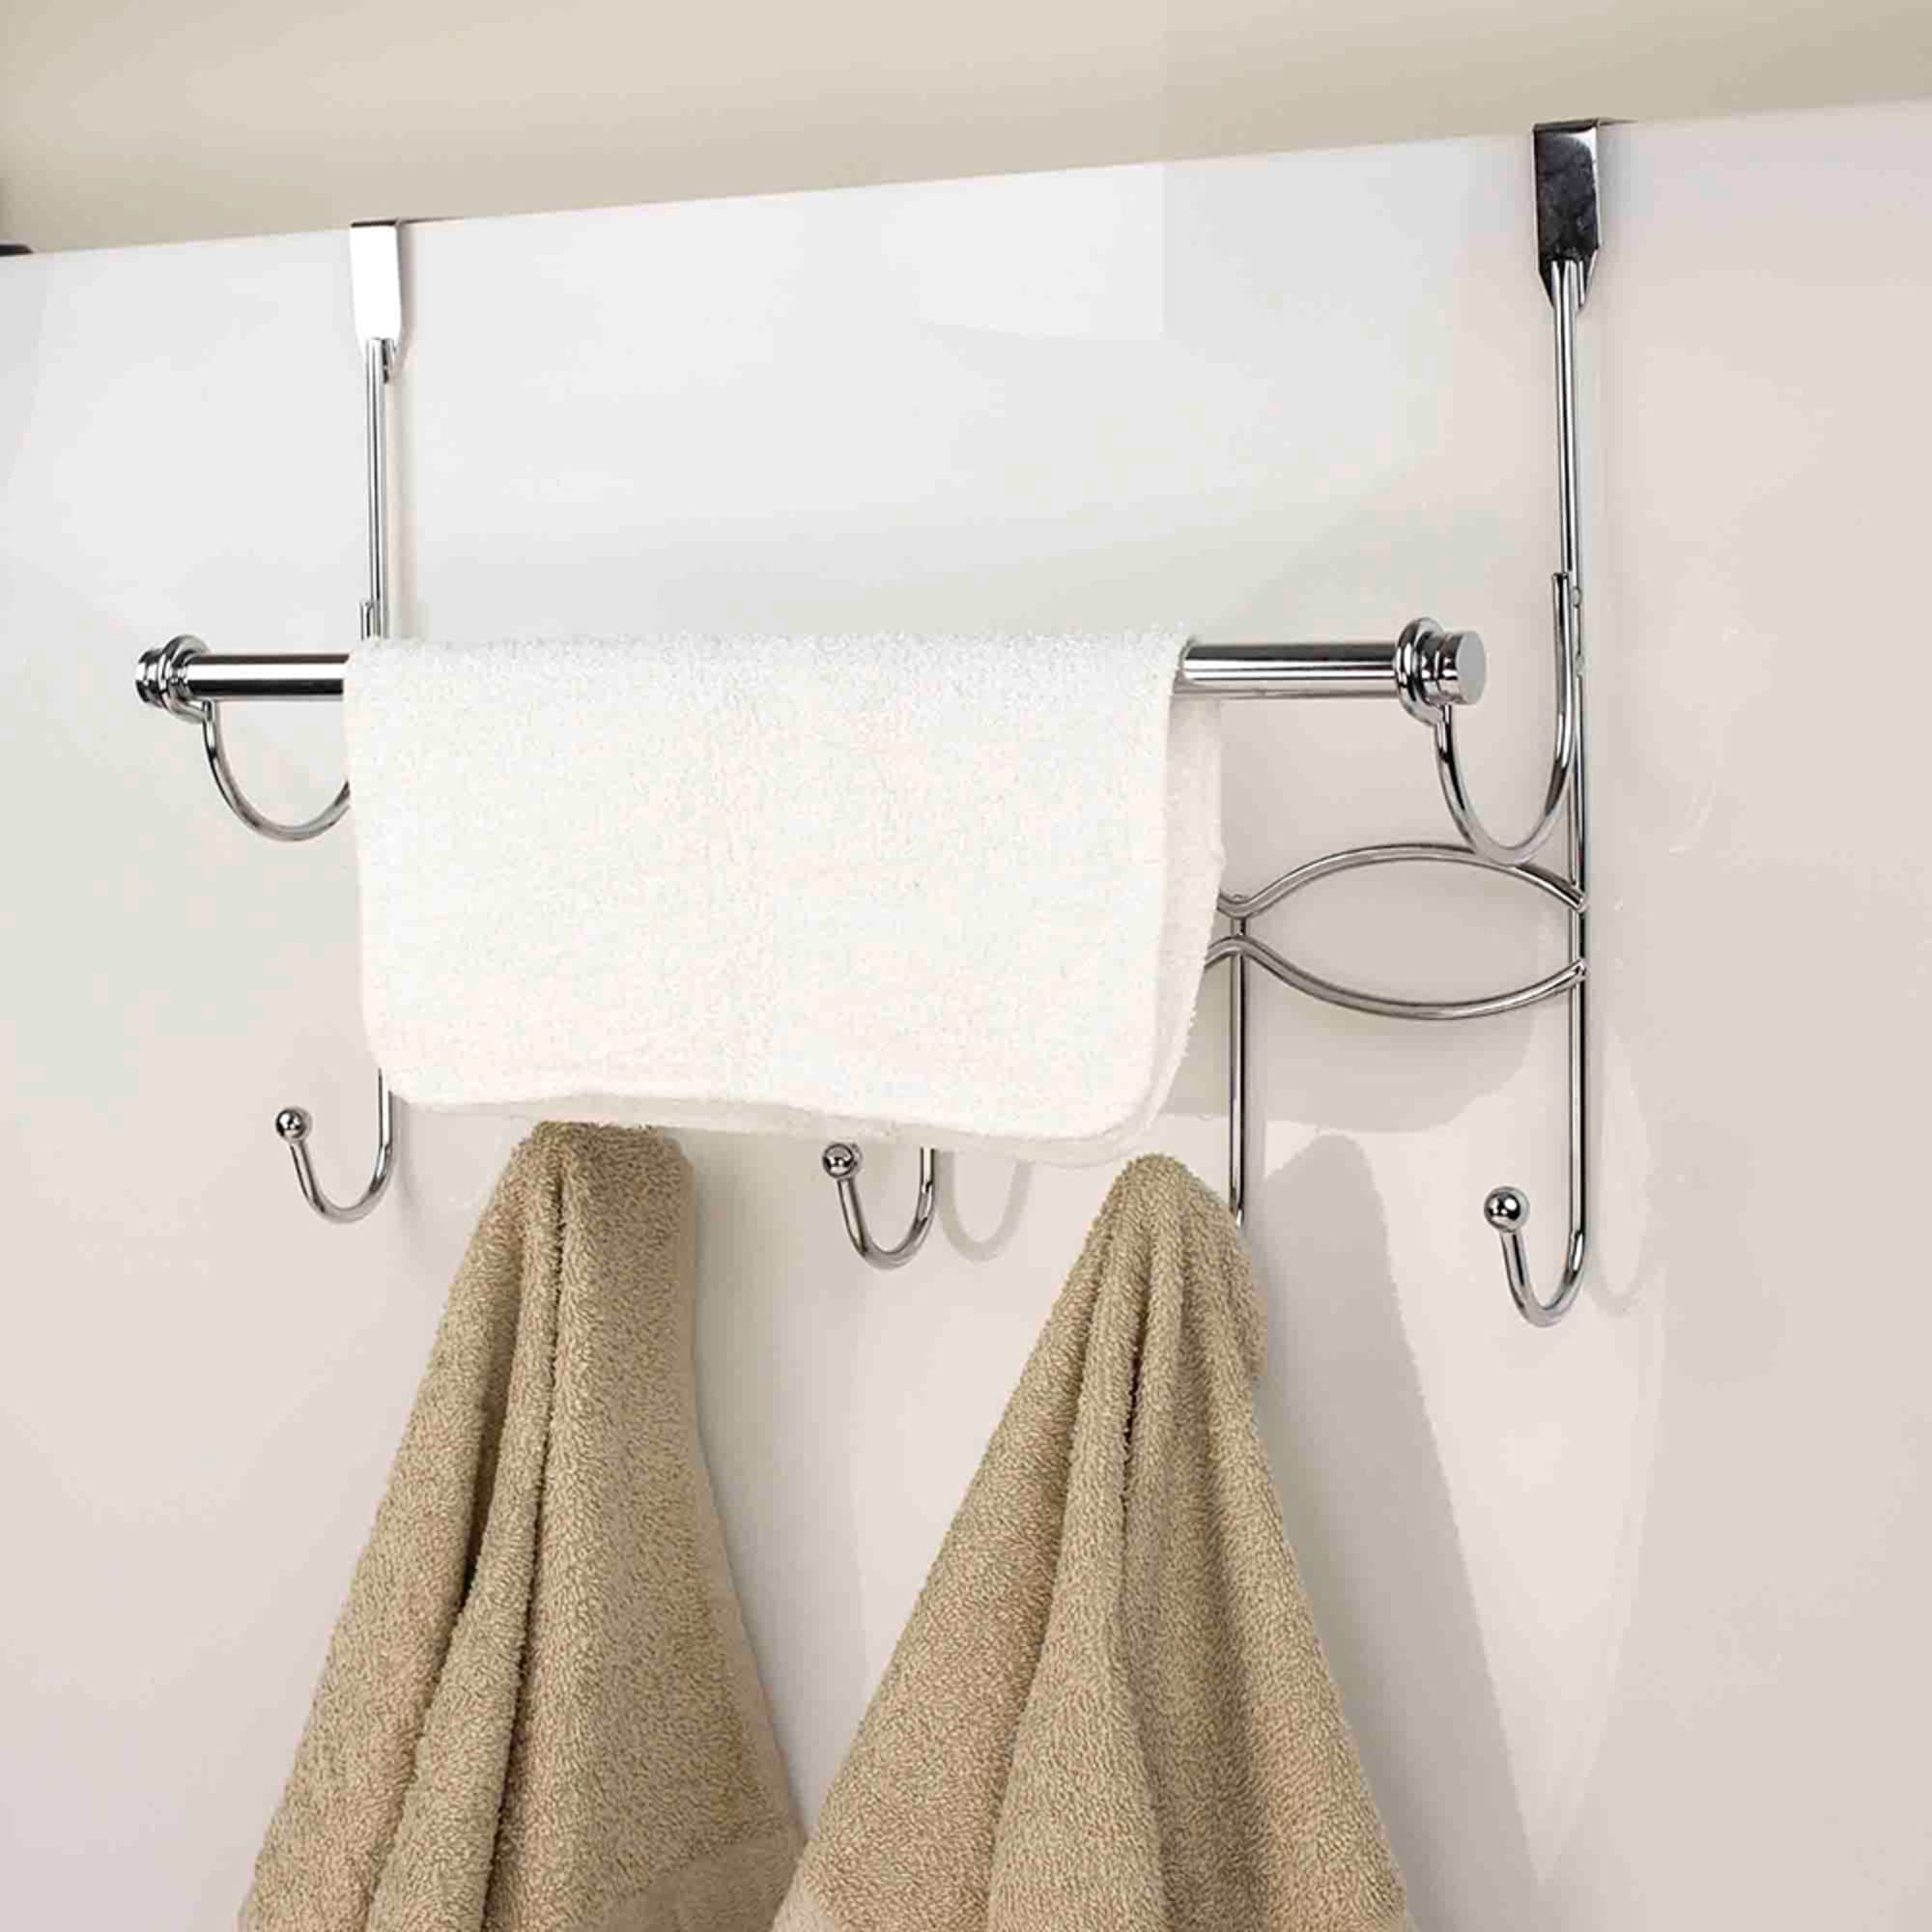 Home Basics Chrome Plated Steel Over the Door Hanging Rack with Towel Bar $12.50 EACH, CASE PACK OF 6